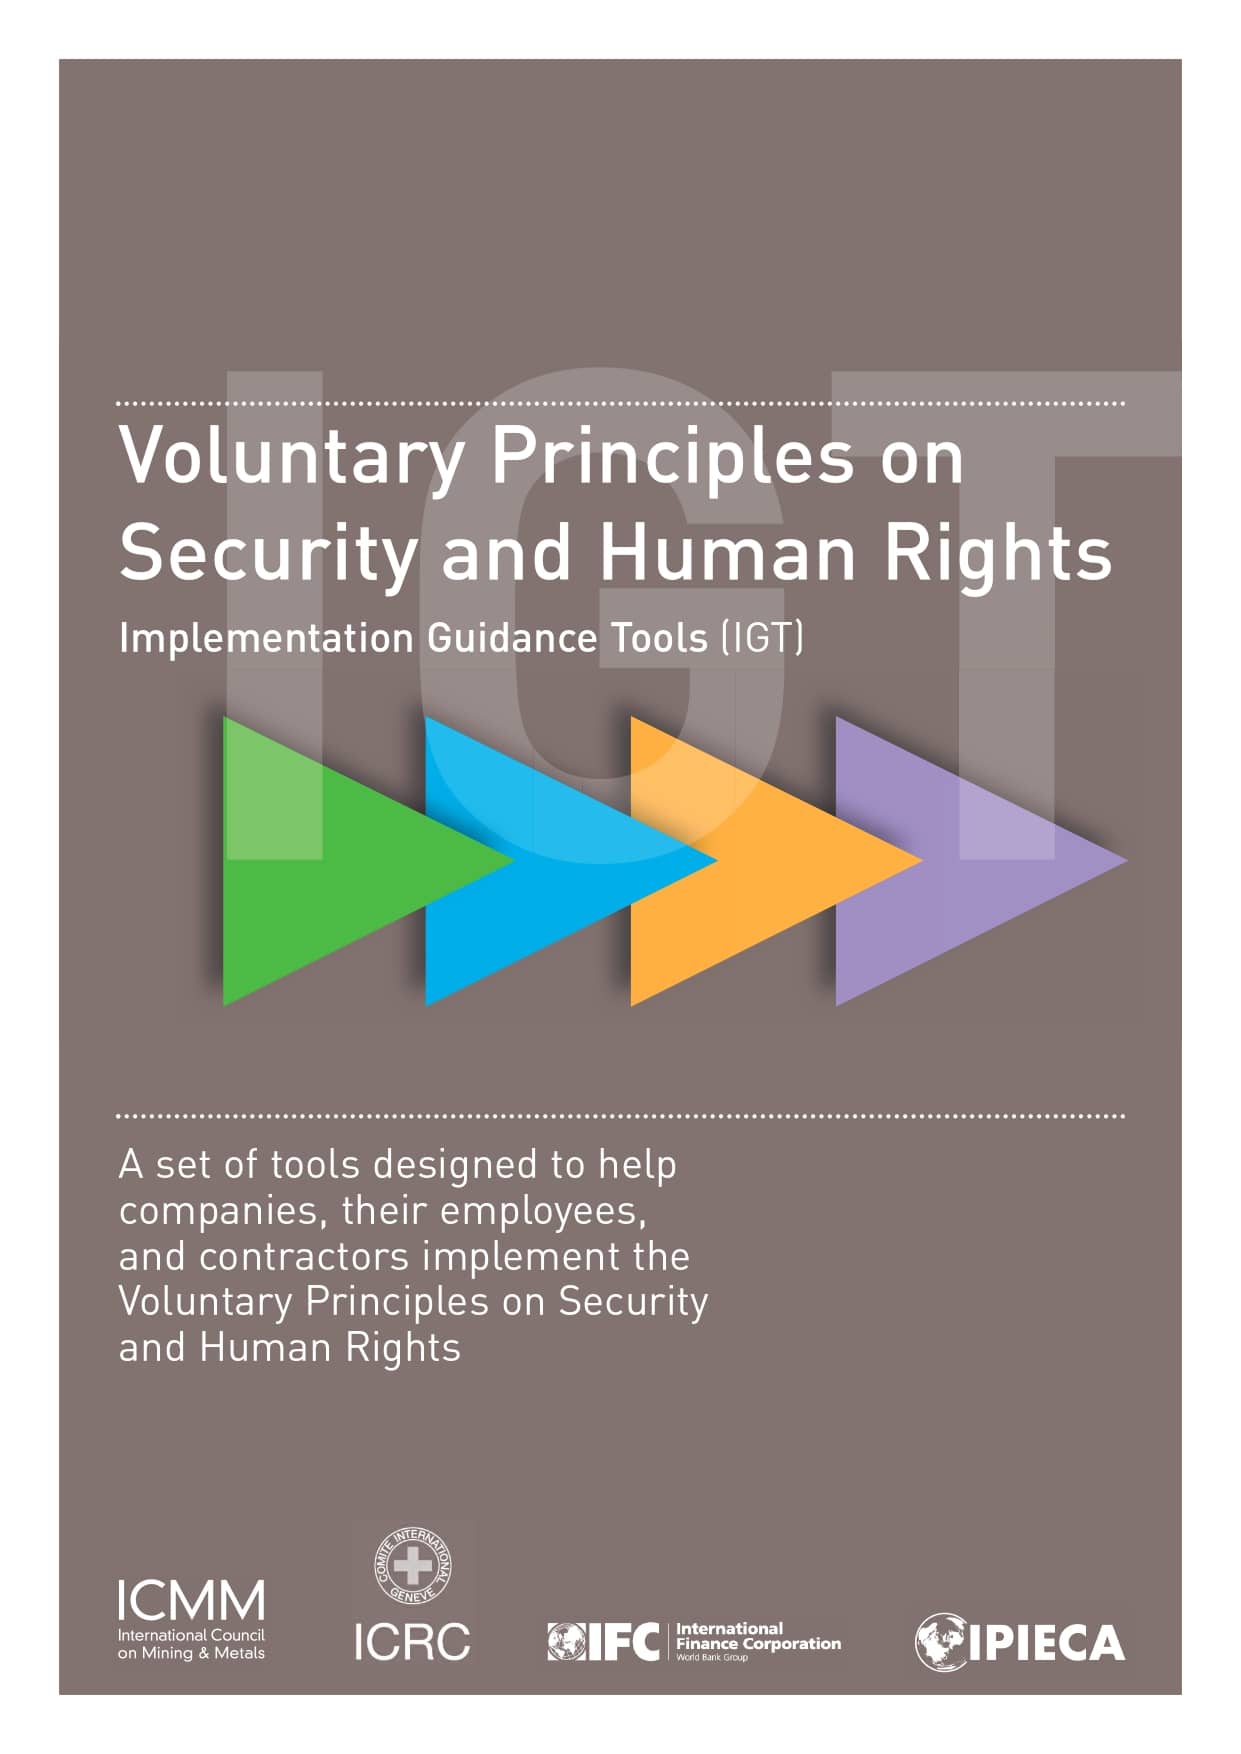 Voluntary Principles on Security and Human Rights Implementation Guidance Tools (ICMM, ICRC, IFC and IPIECA, 2011)